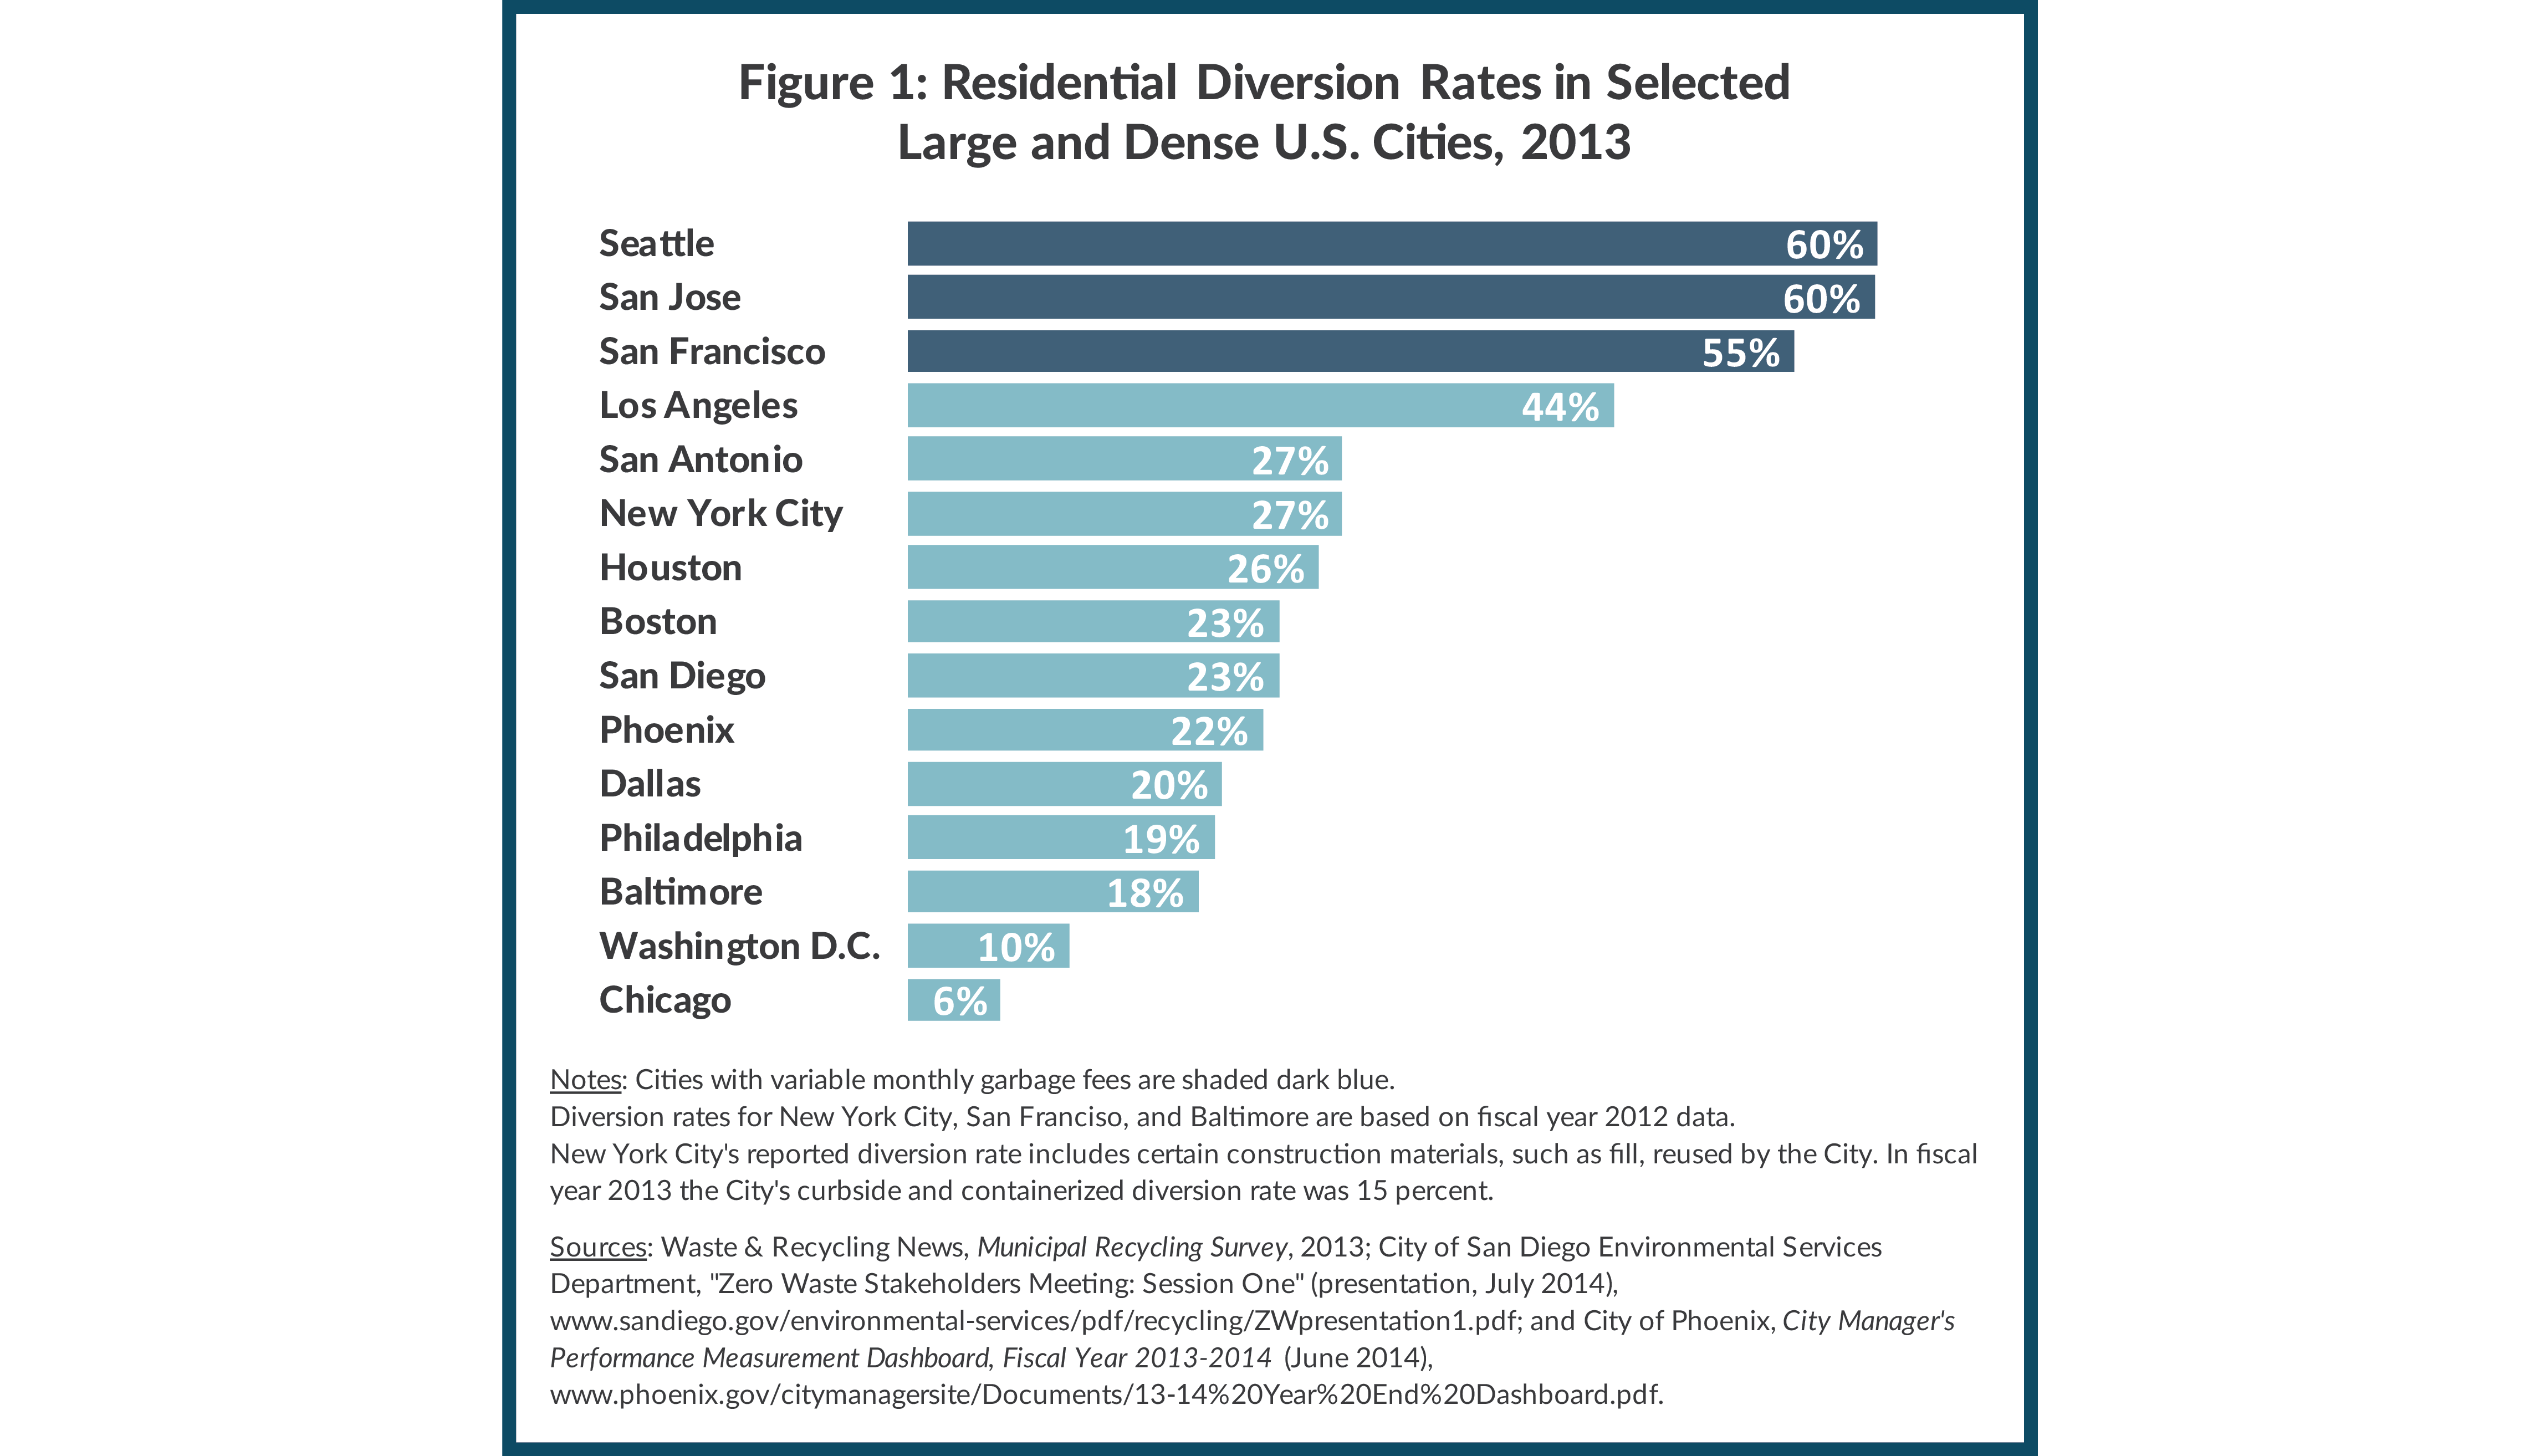 Figure 1: Residential Diversion Rates in Selected Large and Dense U.S. Cities, 2013